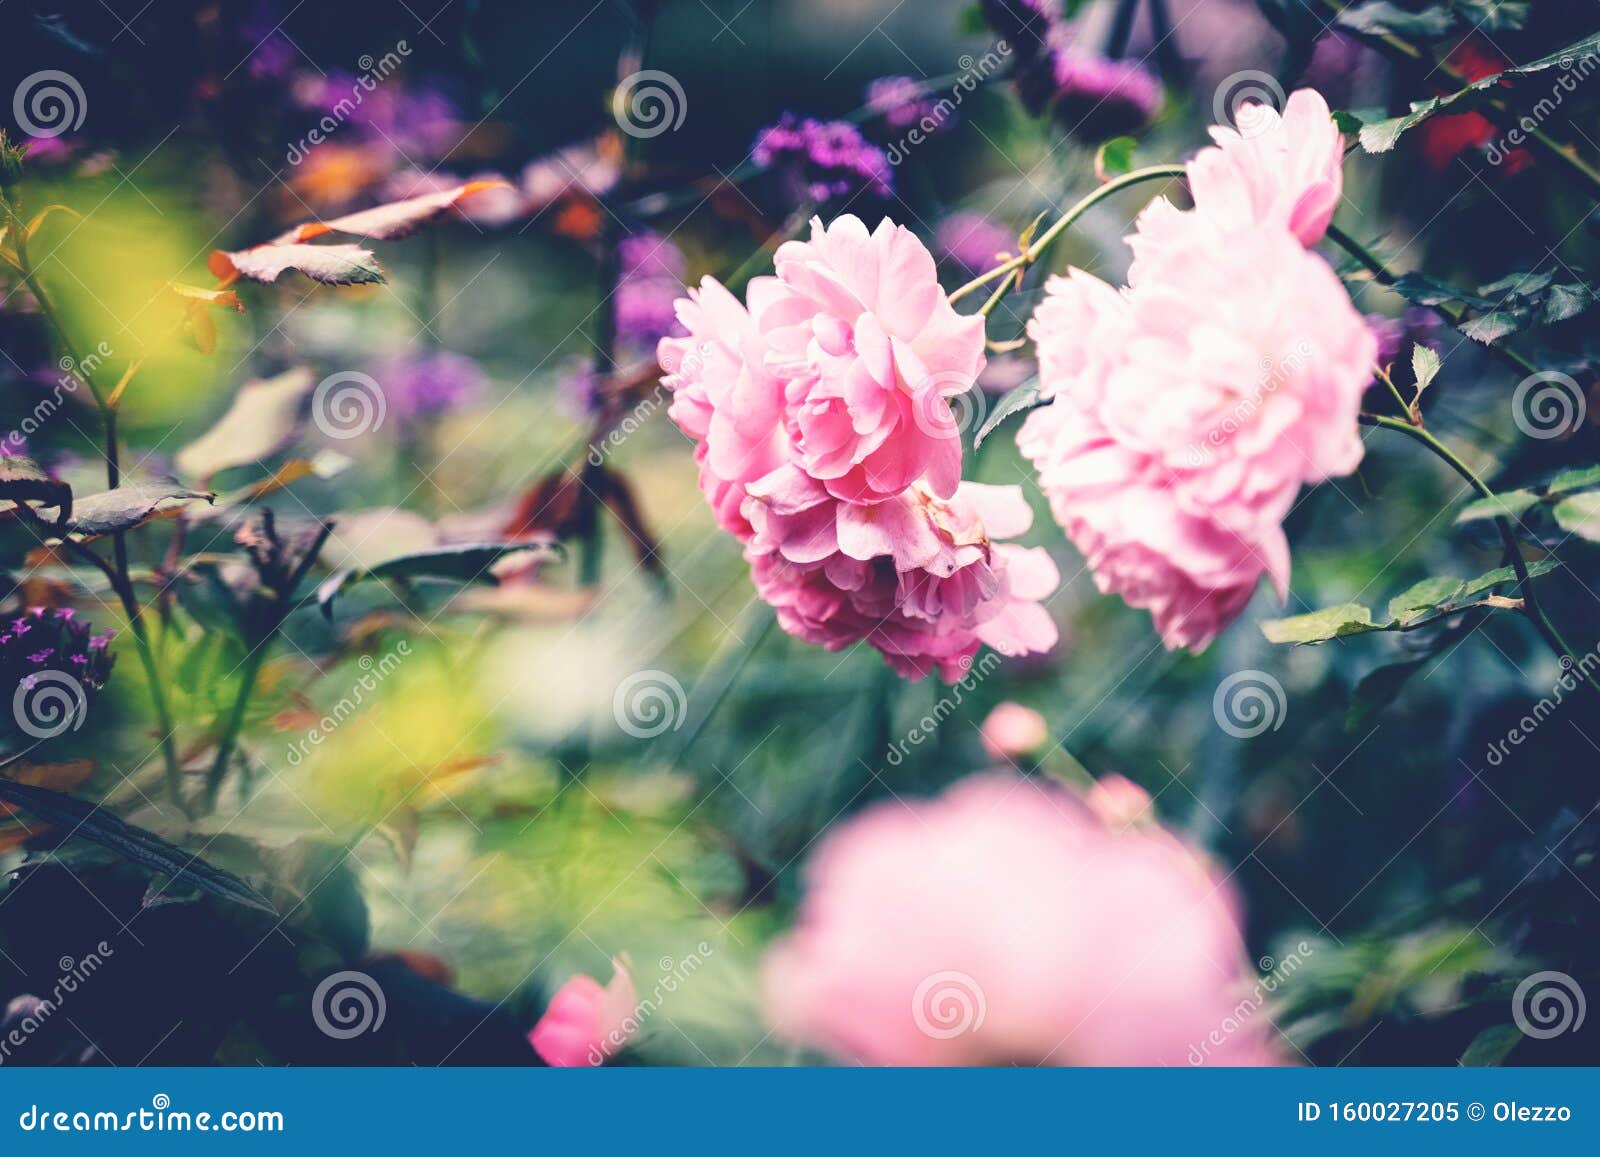 Gorgeous Pink Rose Flower in the Autumn Garden, Image with Soft Focus ...